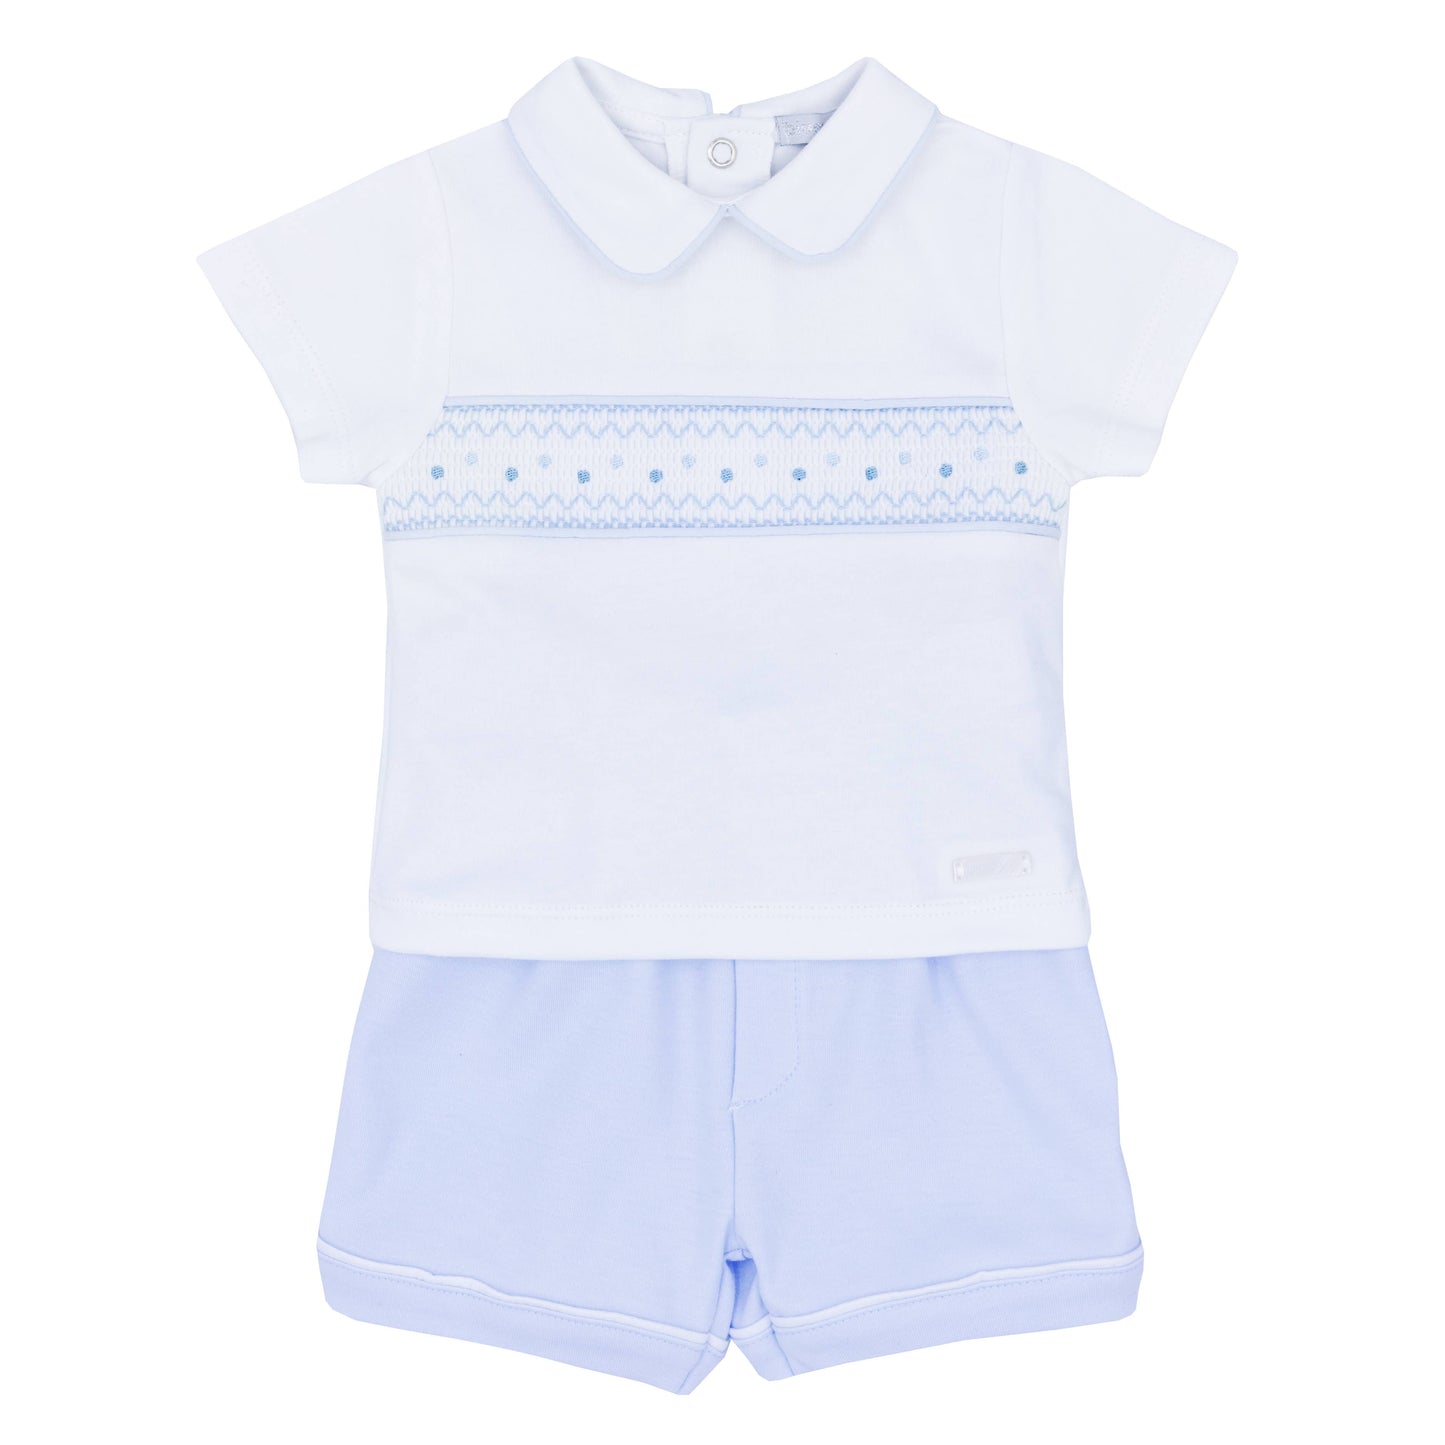 Baby Boys polo shirt and short with smocking detail